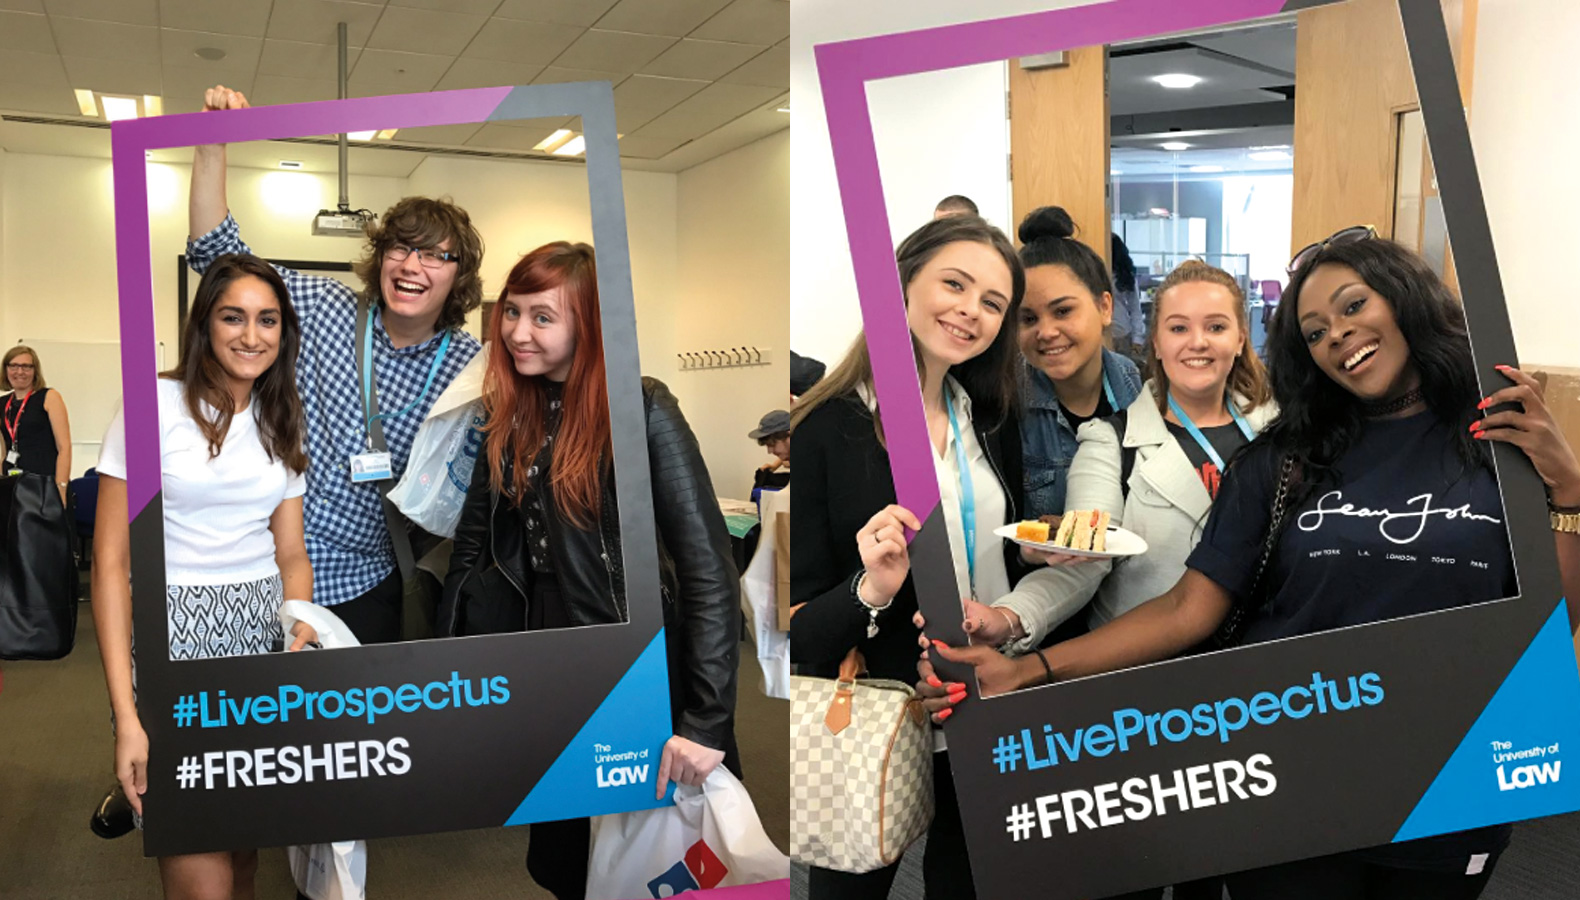 The University of Law – Freshers’ Campaign